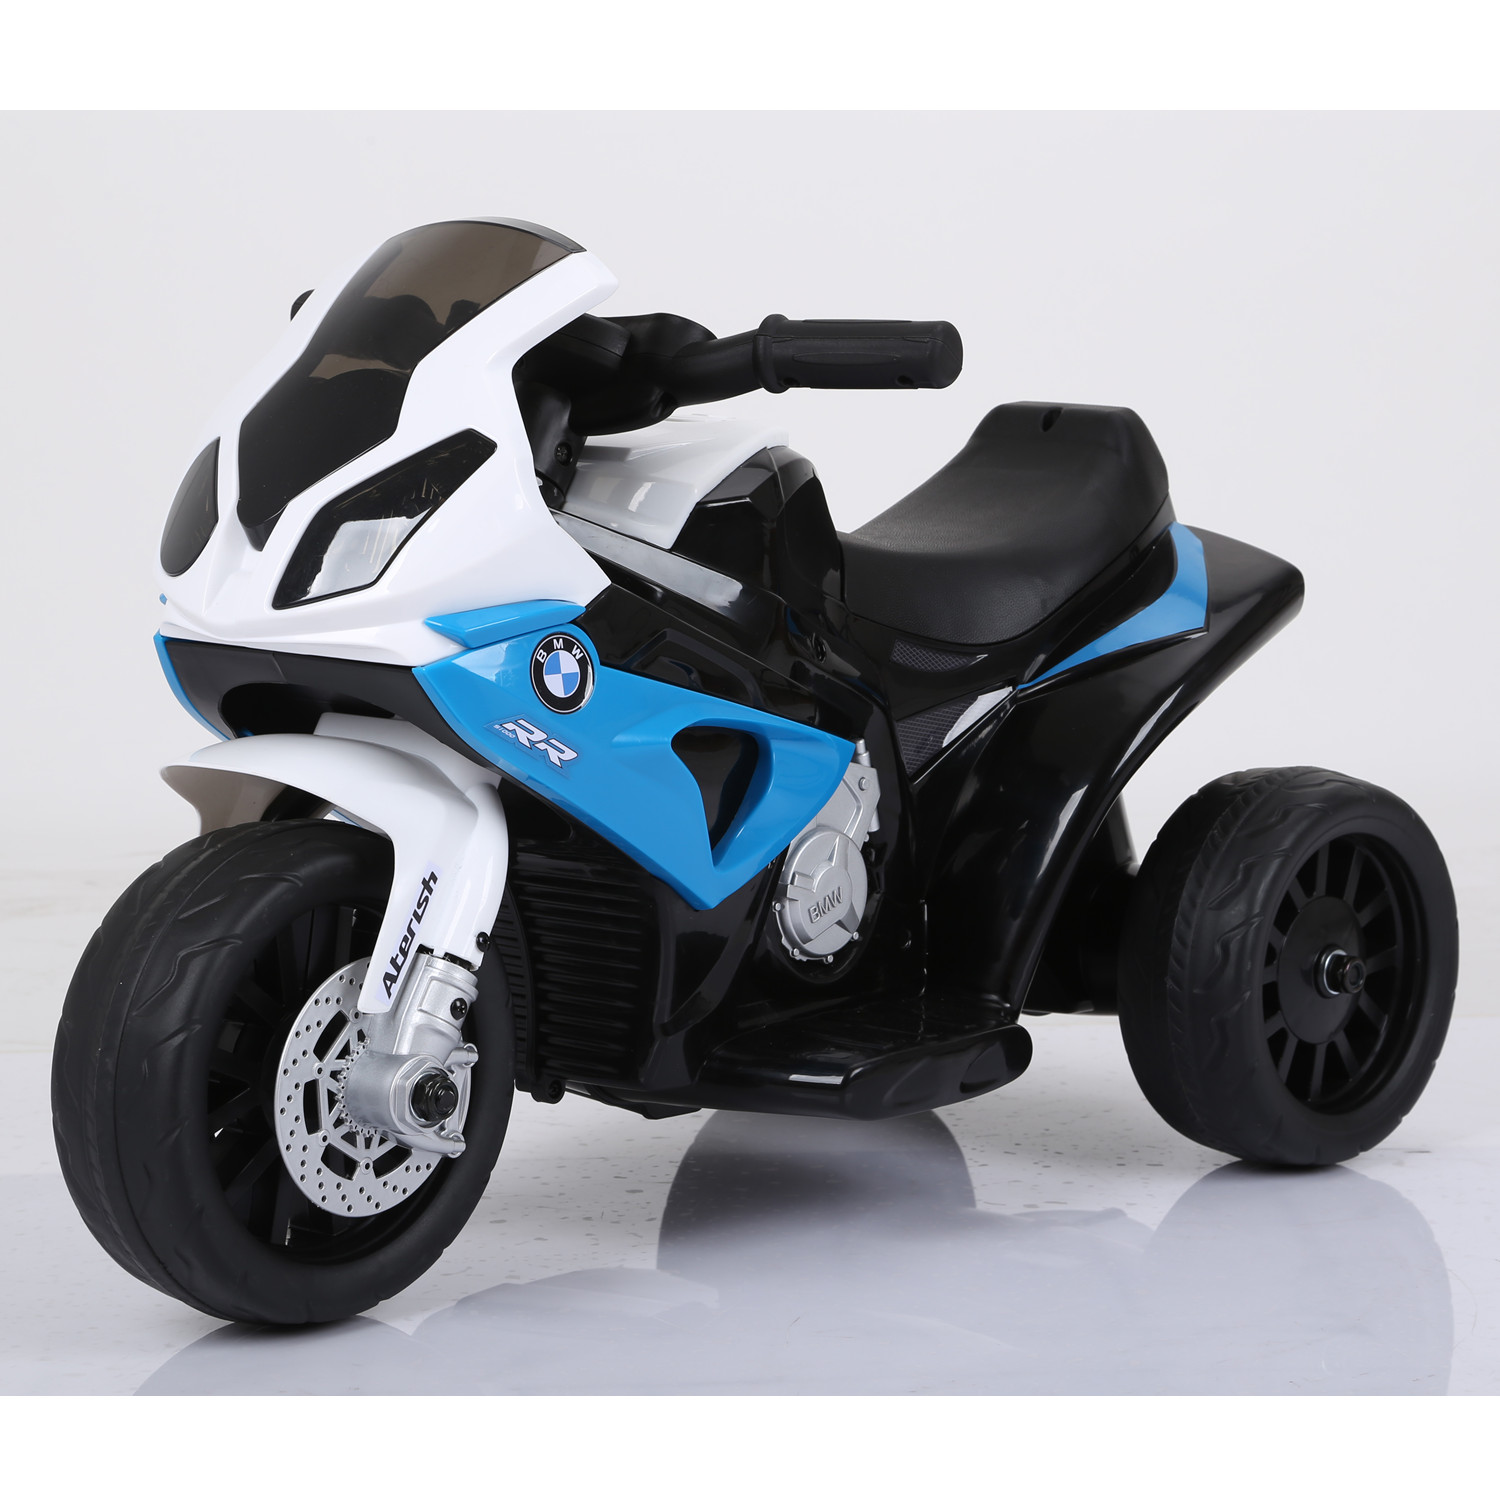 Wonderful Good Price BMW S 1000 RR Official Licensed 12V Rechargeable Battery Children Ride On 3 Wheeler Motorcycle with Balance Wheels, Key Starter, EVA Wheels, Leather Seat